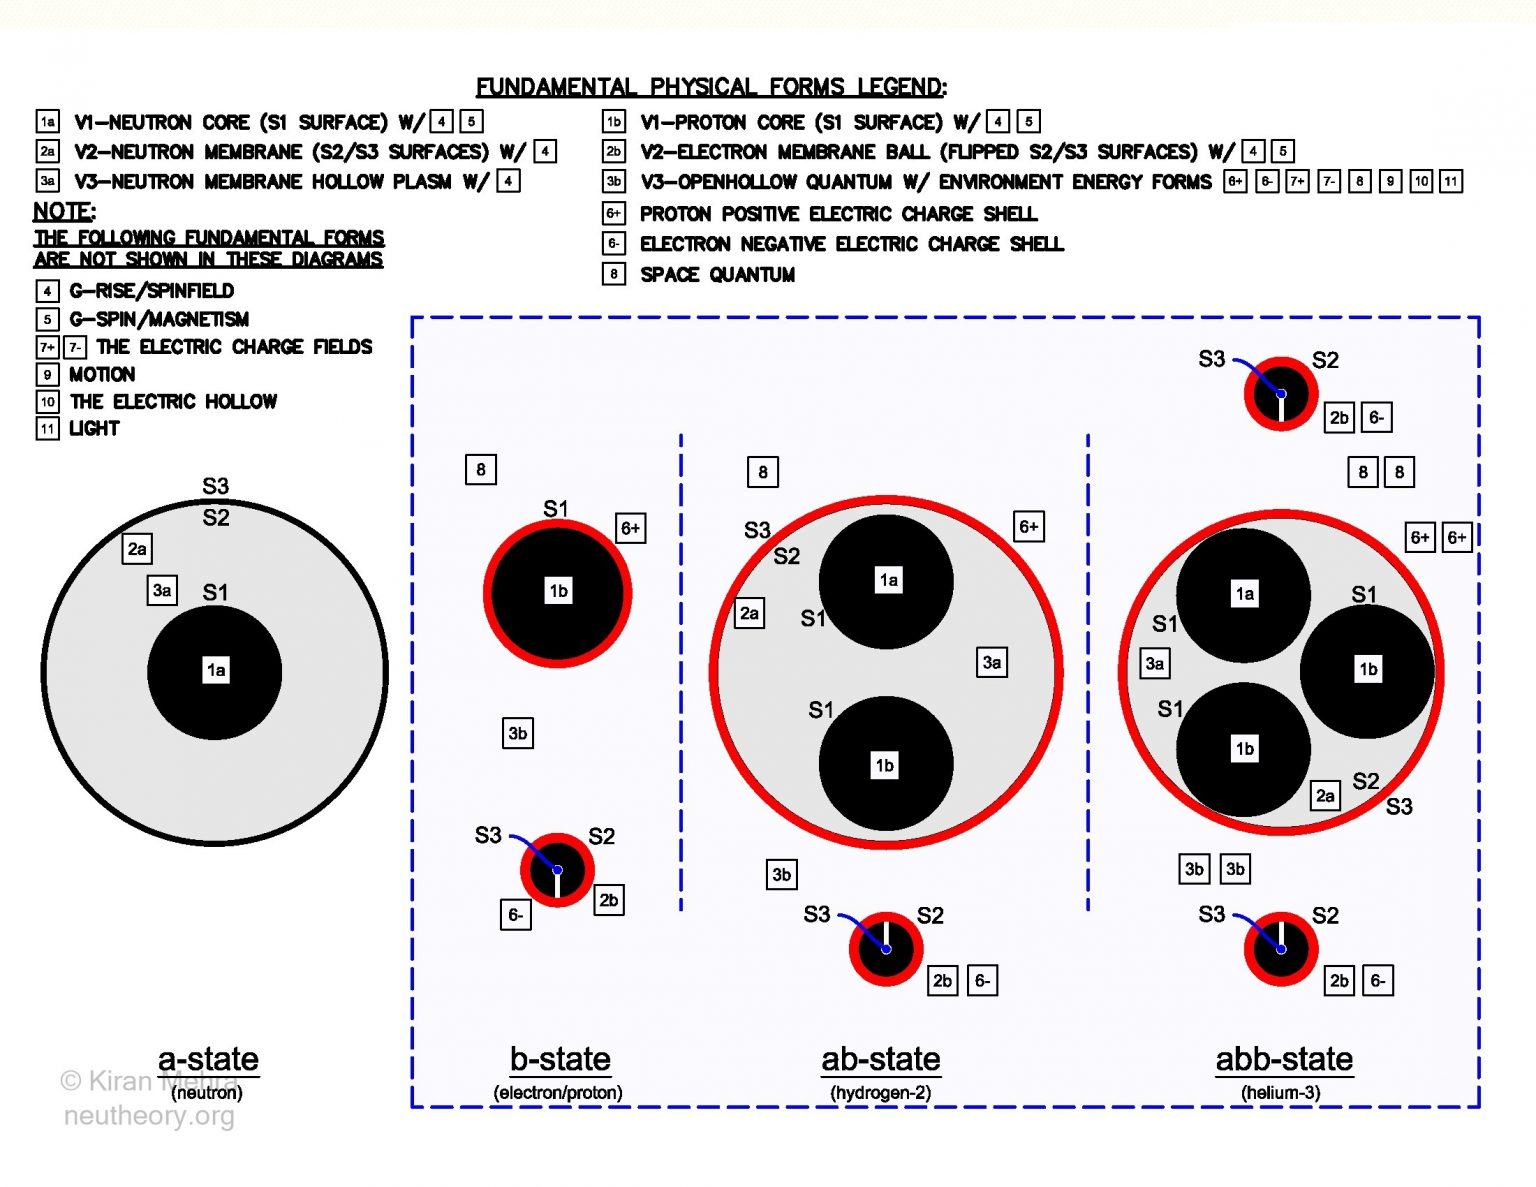 four diagrams showing balls and balls within balls with red bands representing the neutron, hydrogen, deuterium, and helium-3